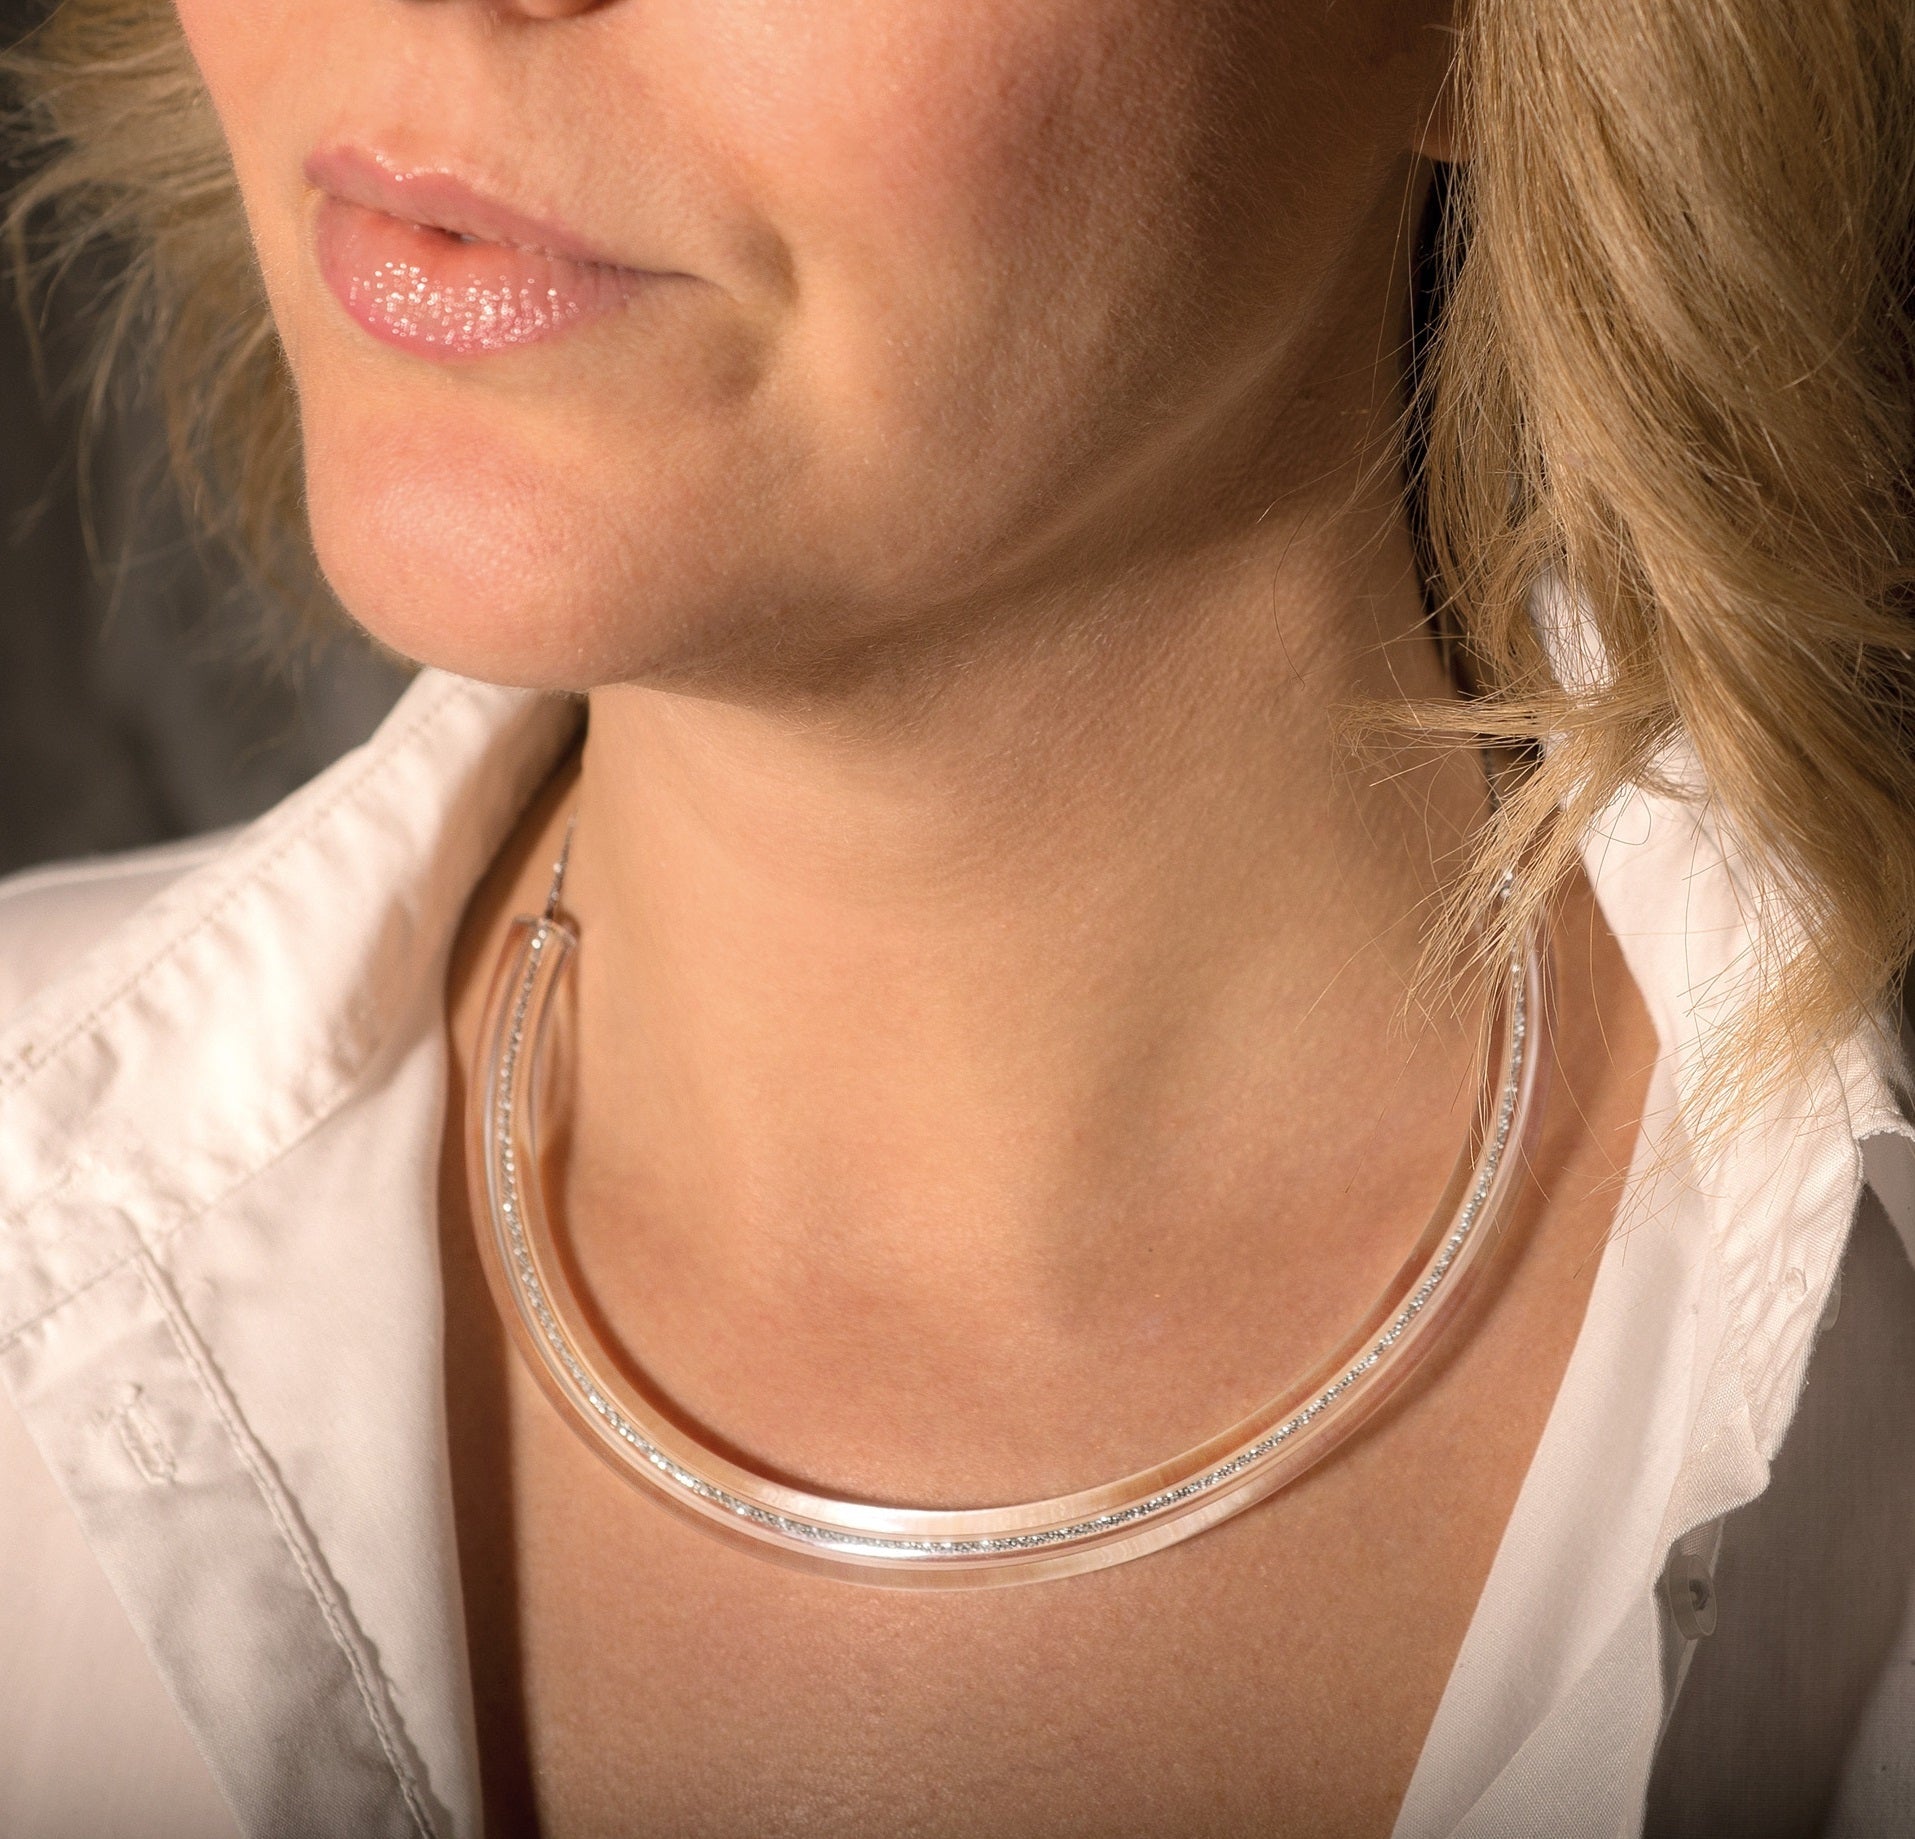 Janet, tubular collar necklace in glass and silver